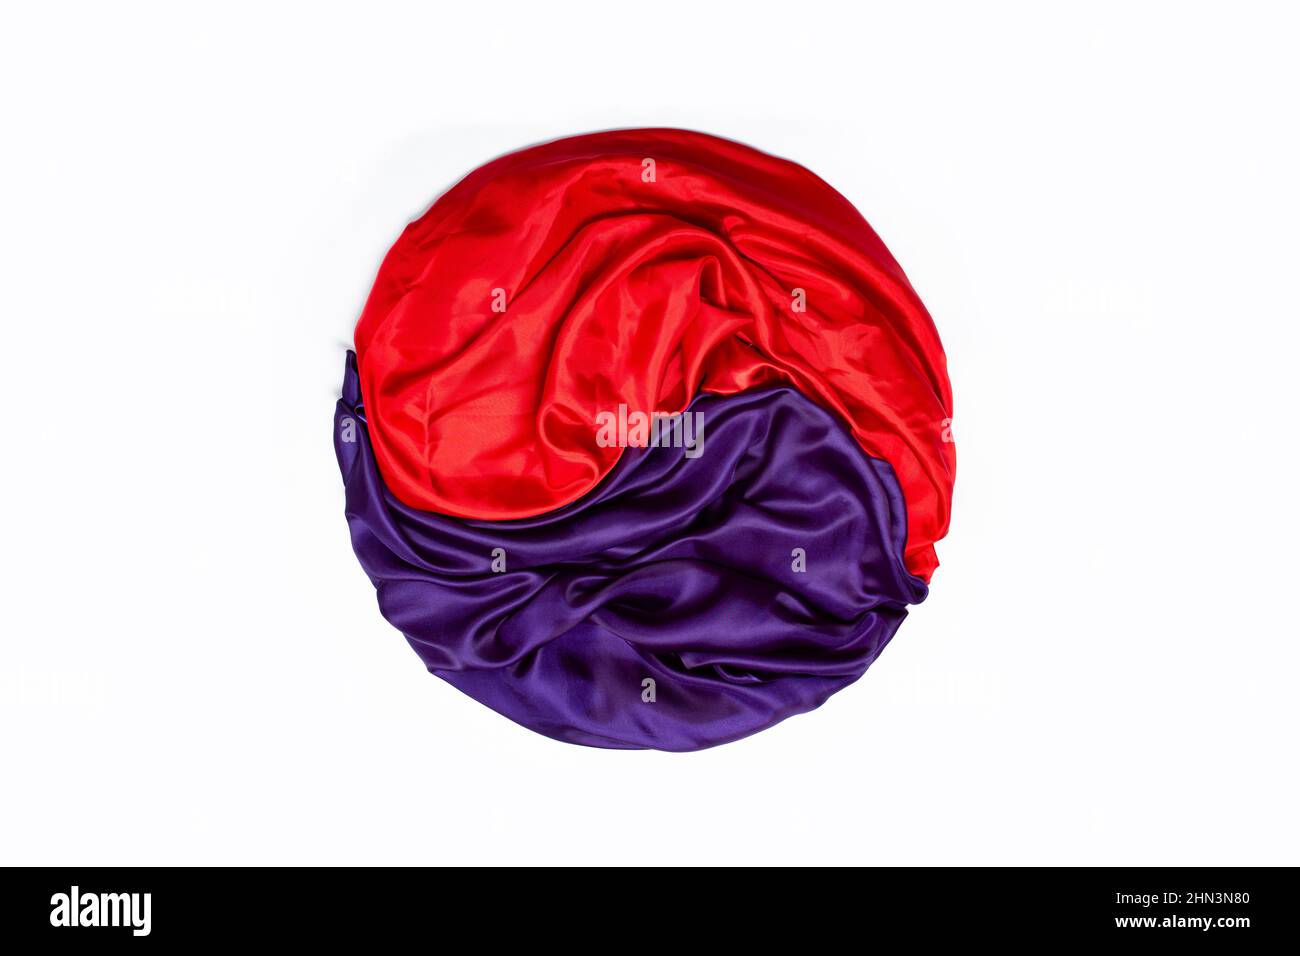 south Korean flag, yin and yang symbol made from red and purple satin on white background Stock Photo